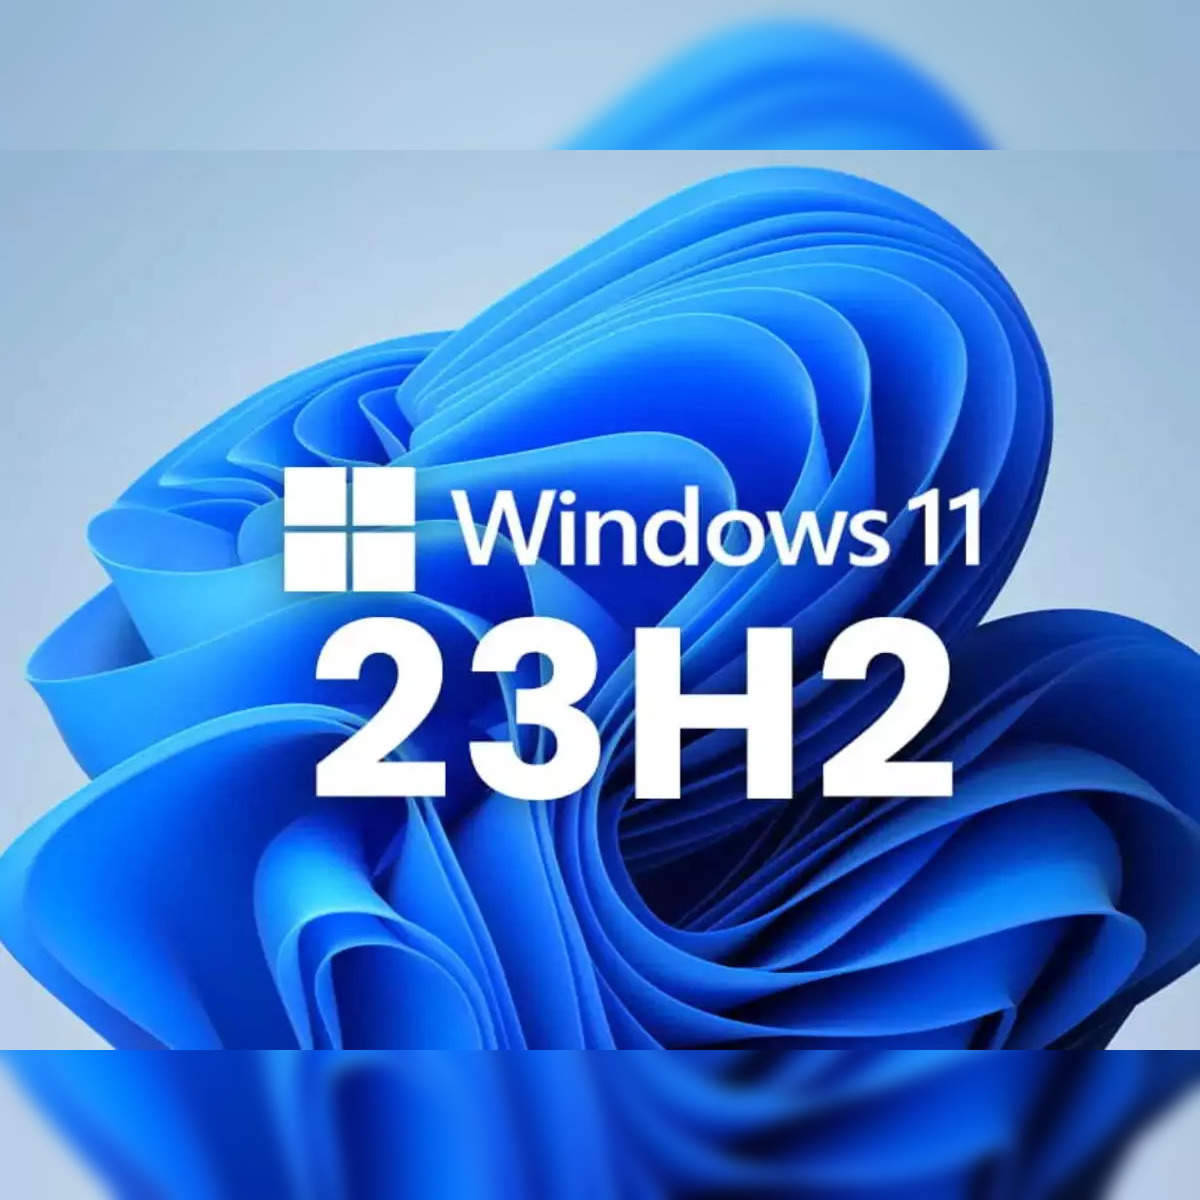 Windows 11 version 23H2 (2023 Update) review